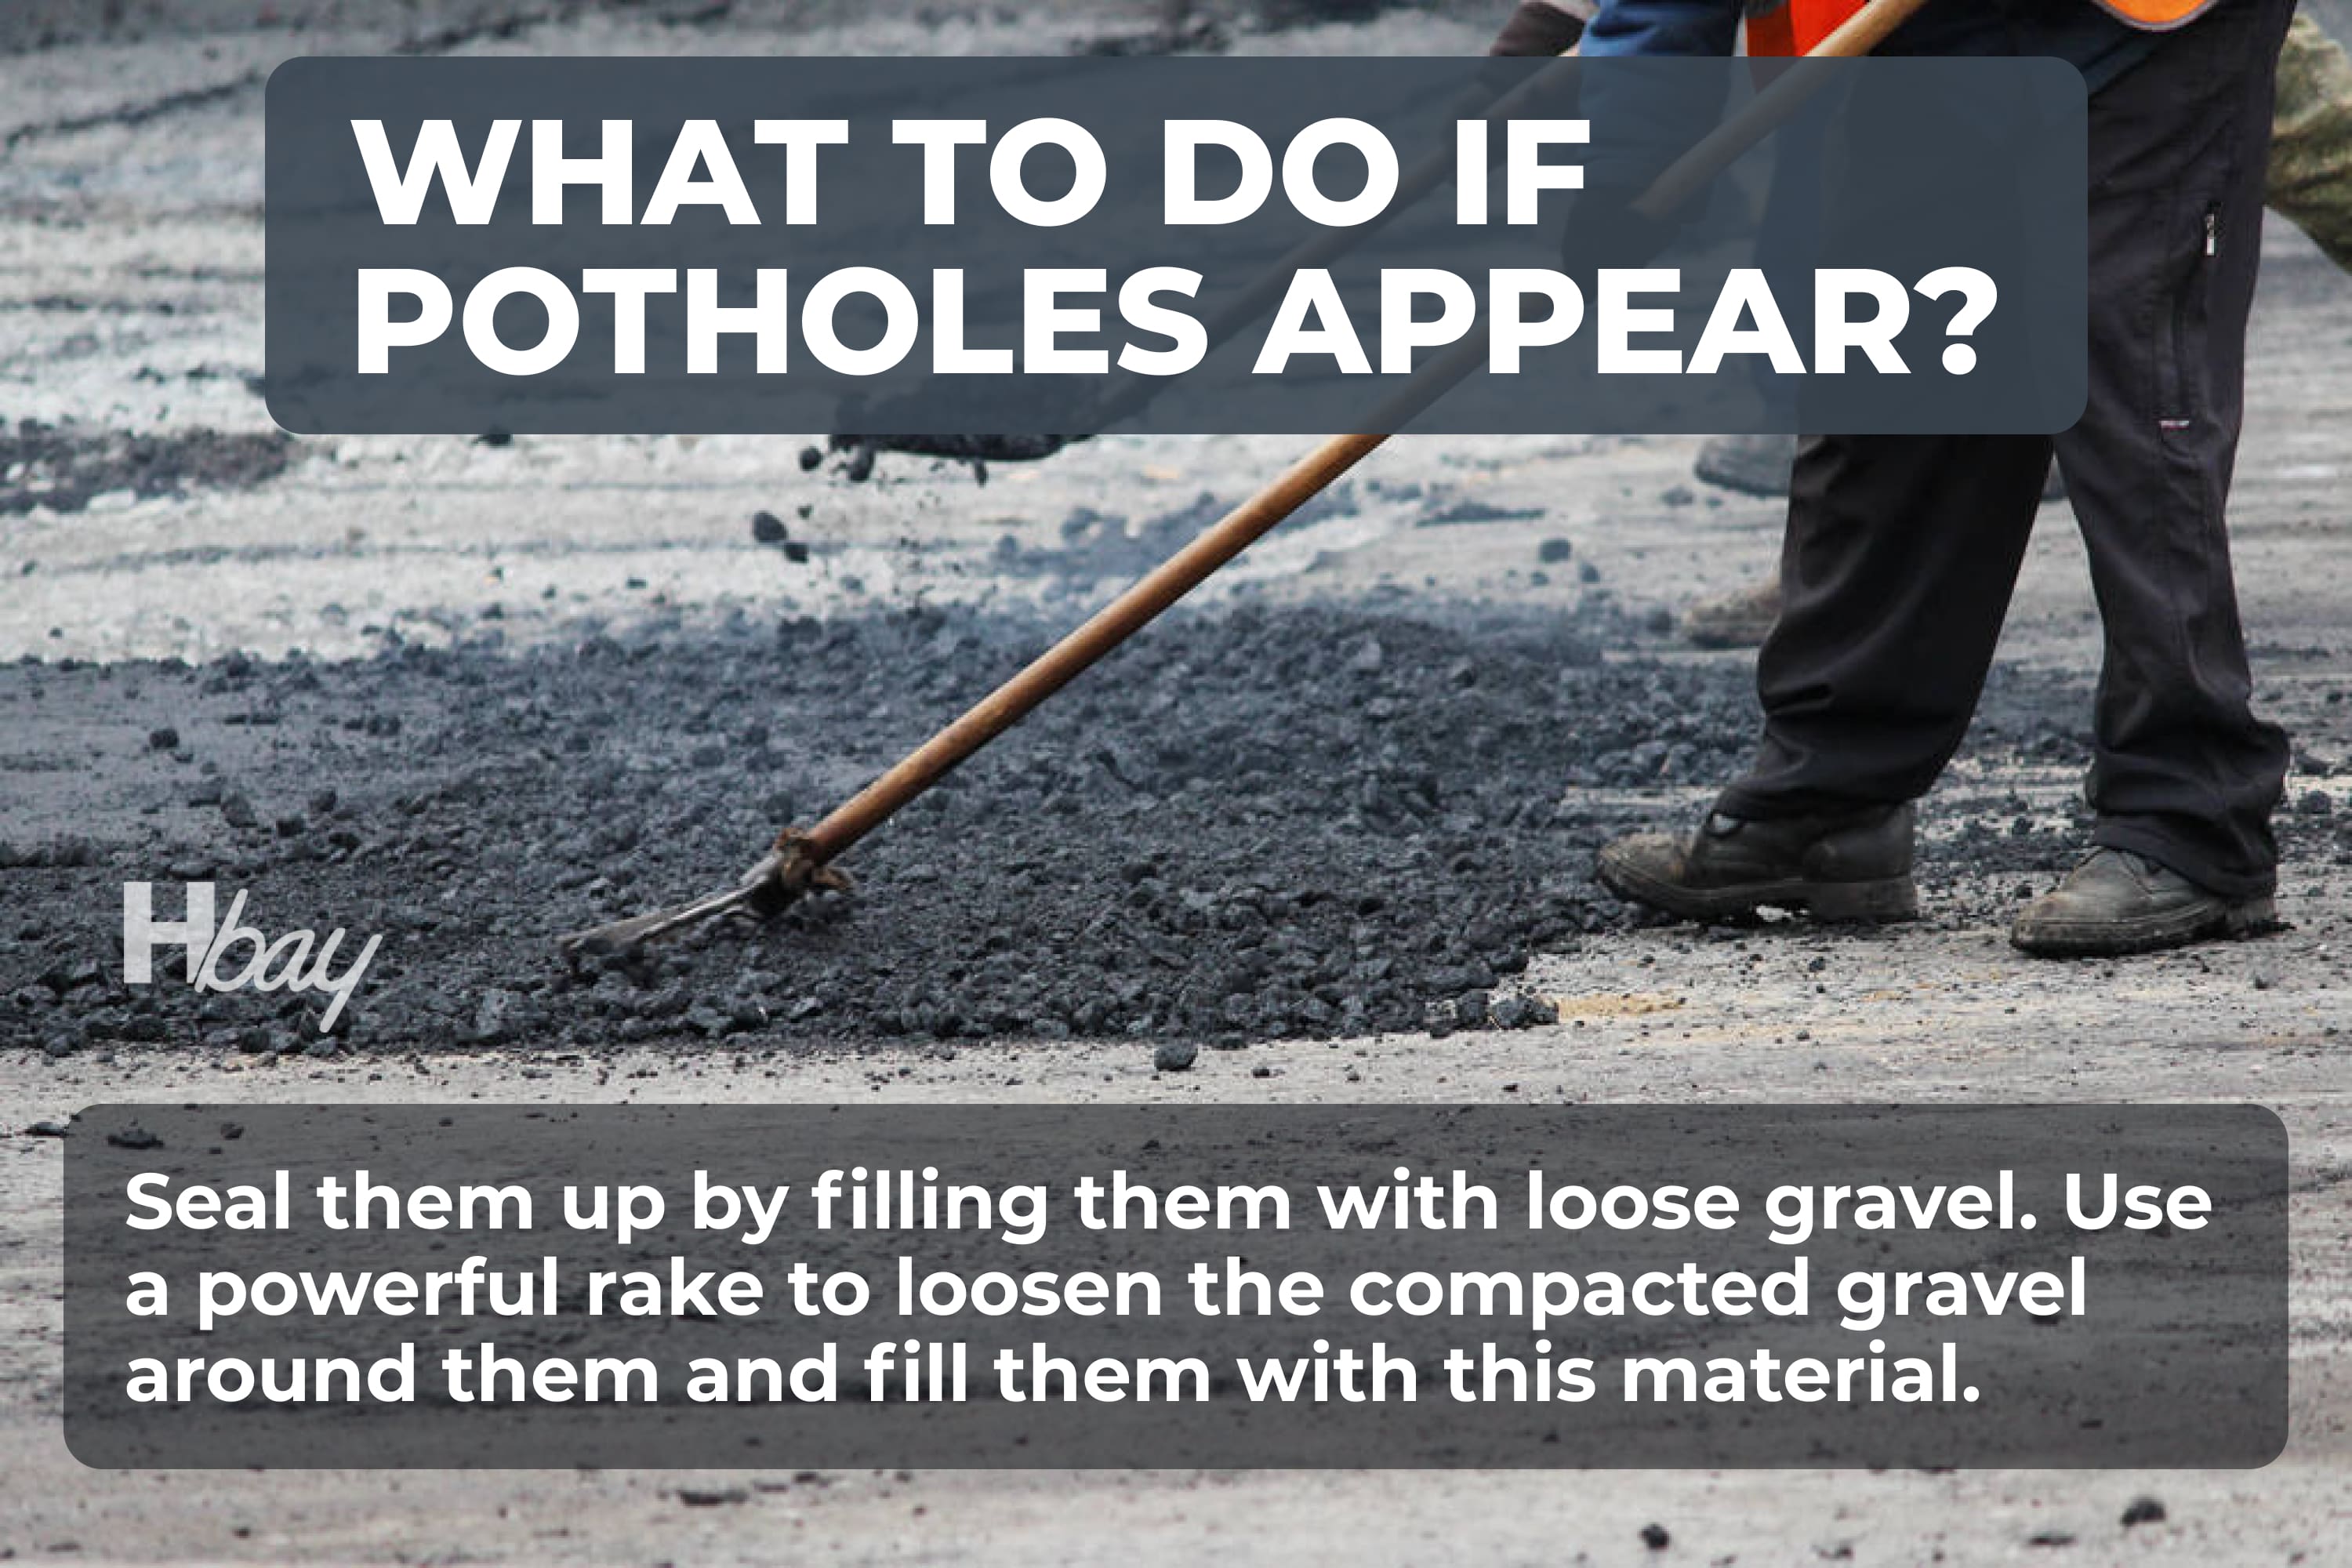 What to do if potholes appear